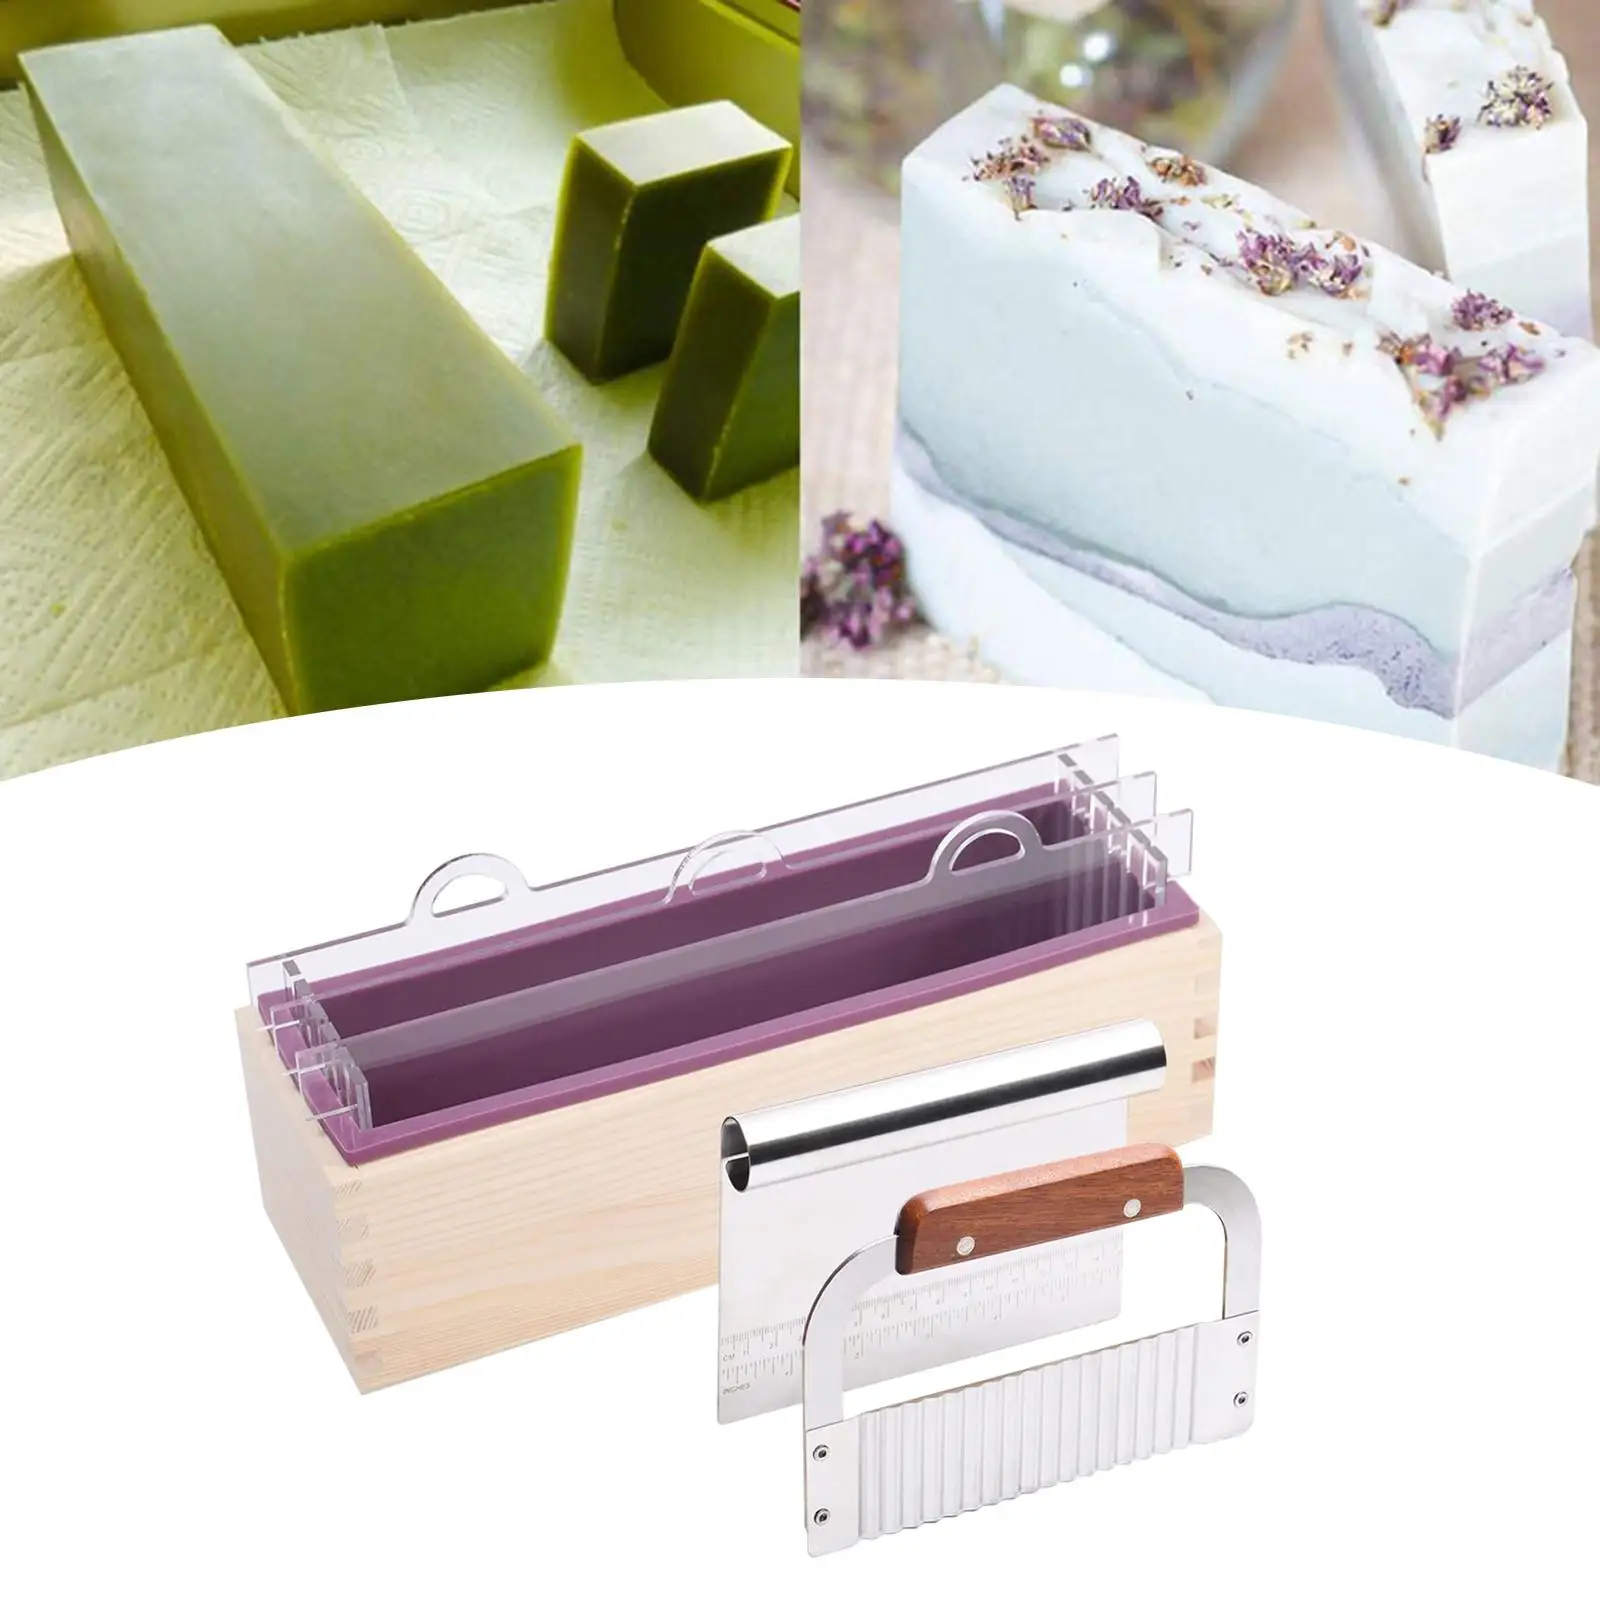 Wood Silicone Soap Mold Set with Acrylic Separators DIY Handmade Soap Making Supplies Soap Mould